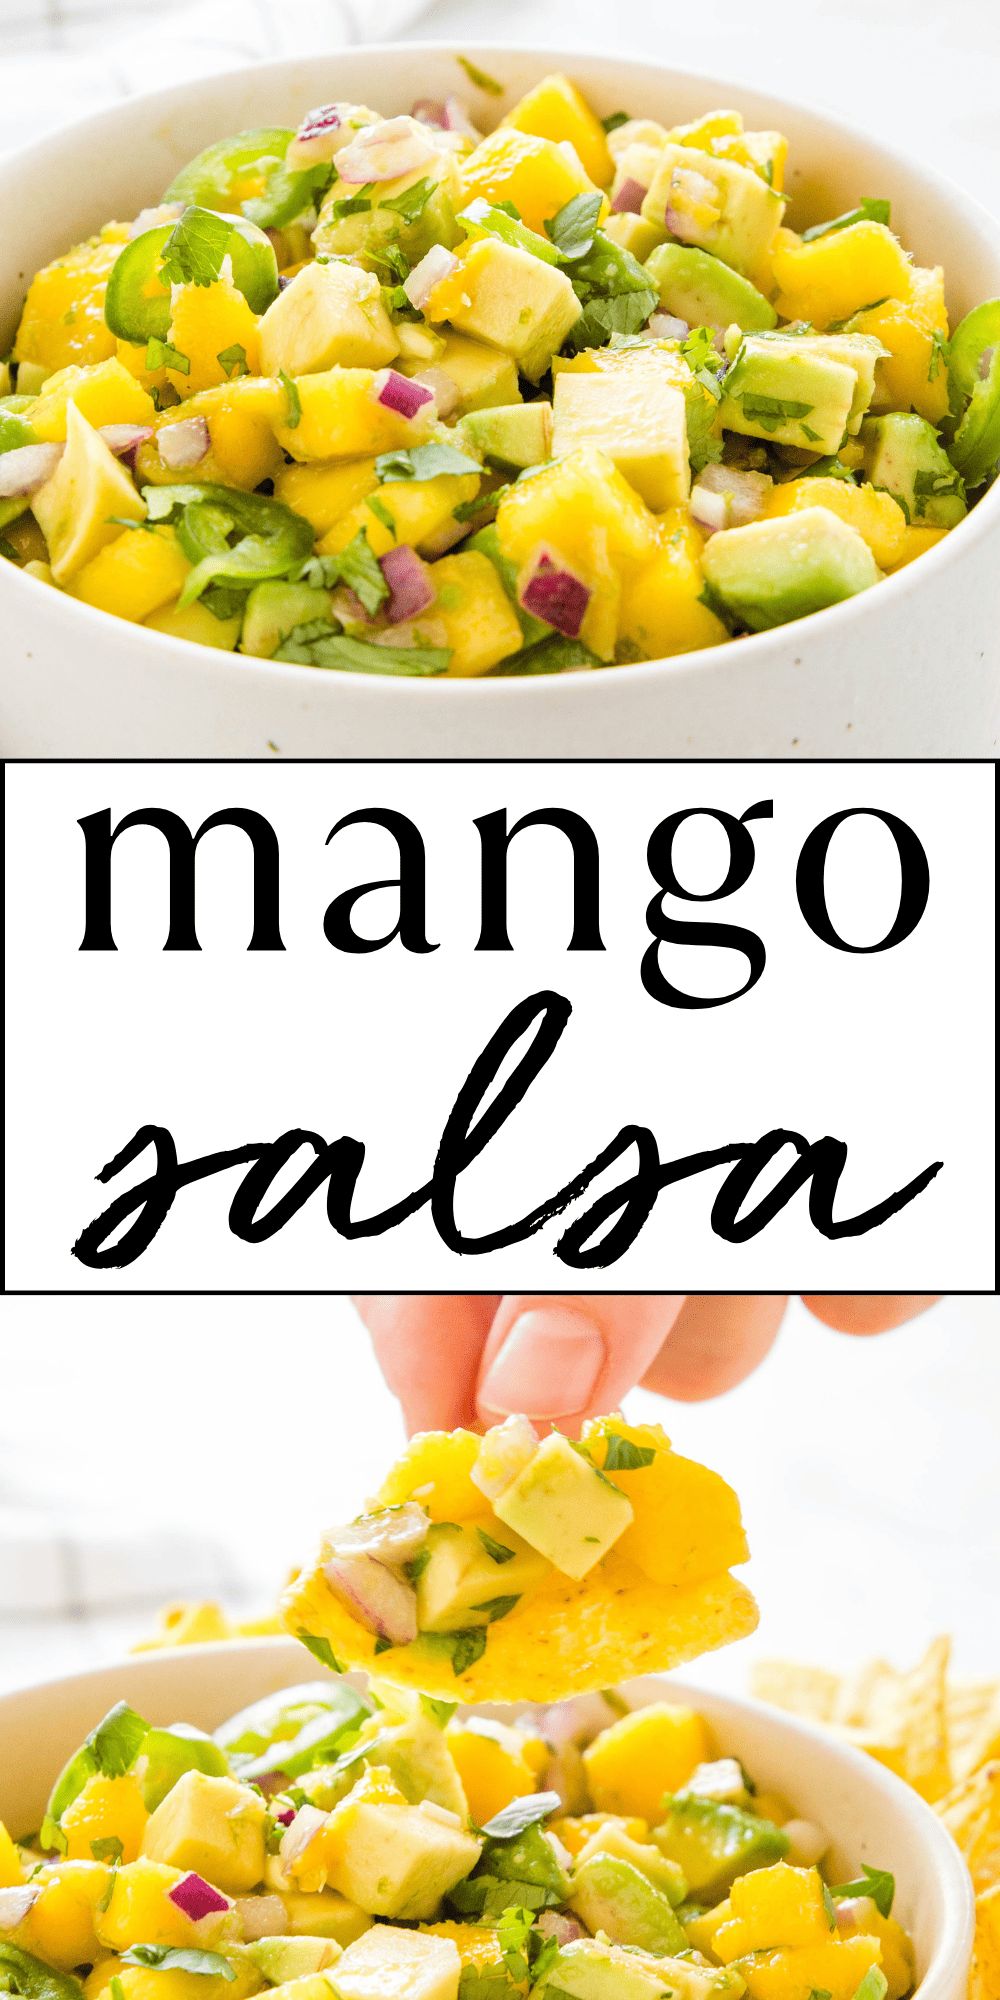 This Mango Salsa recipe is fresh and delicious and made with avocado, jalapeno and lime. The perfect mango salsa for fish, grilled chicken, or for dipping with tortilla chips. Recipe from thebusybaker.ca! #mangosalsa #mangosalsarecipe #mangoavocadosalsa #salsarecipe #dip #appetizer #mangosalsaforfish via @busybakerblog